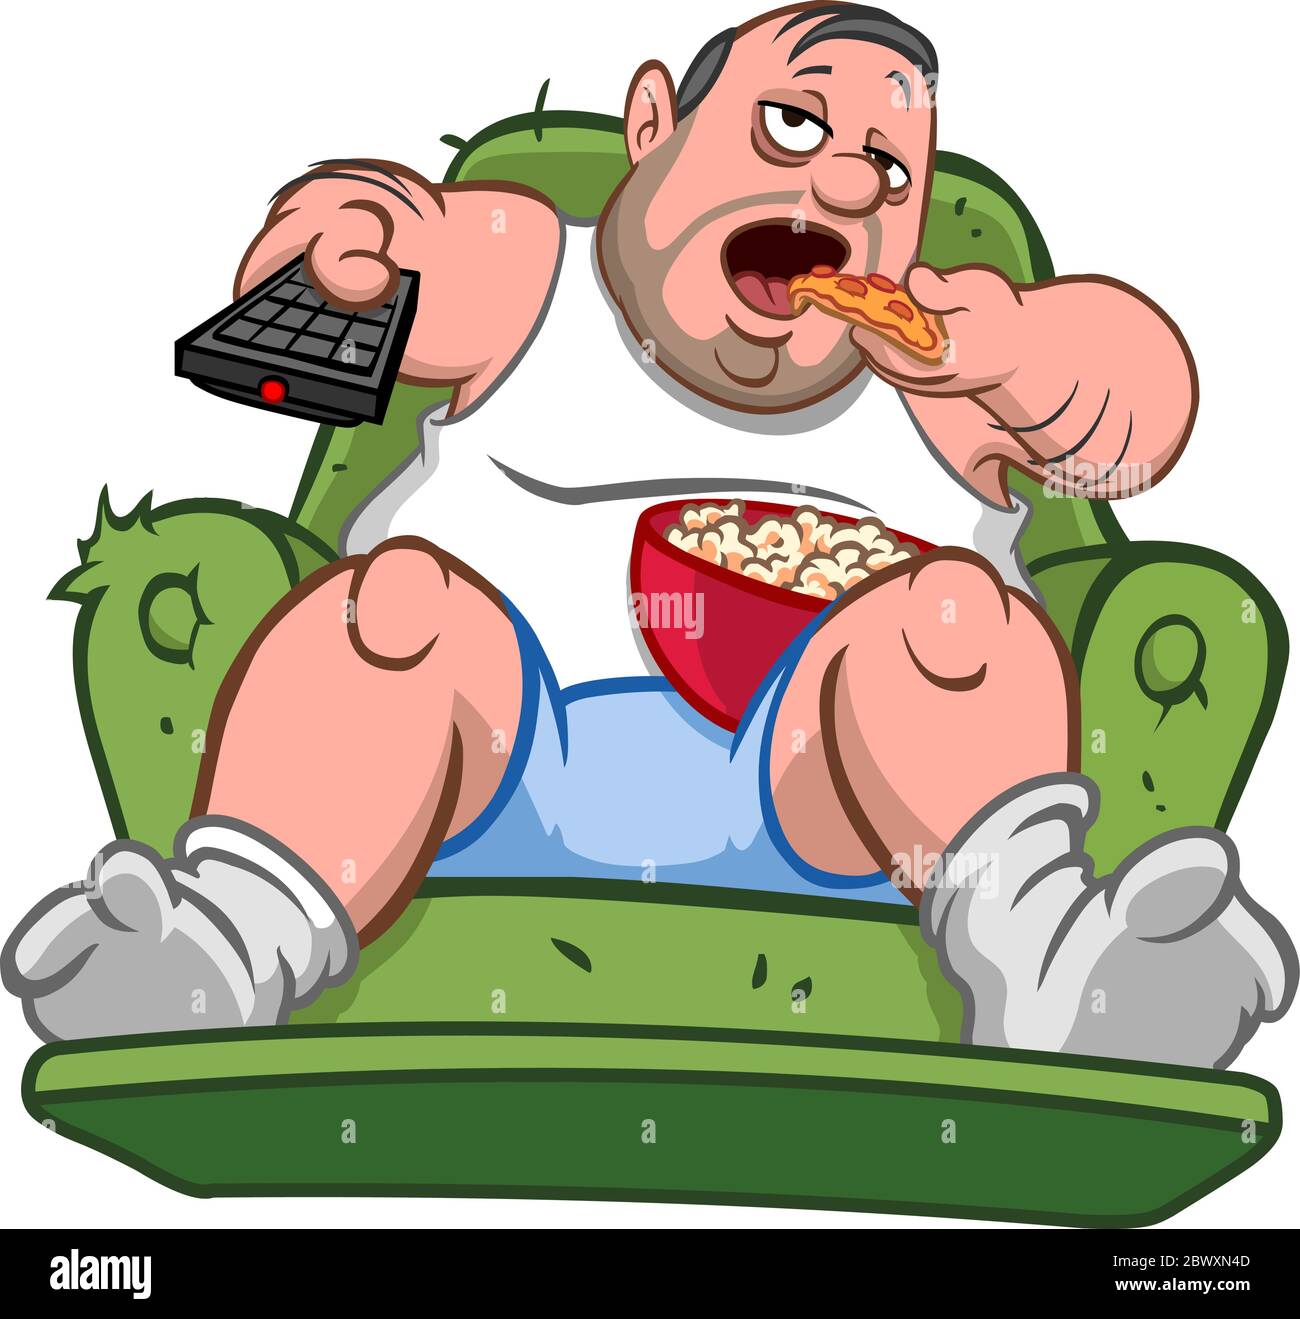 Couch potato slob overweight man sitting on the sofa, eating pizza slice and popcorn while watching TV Stock Vector